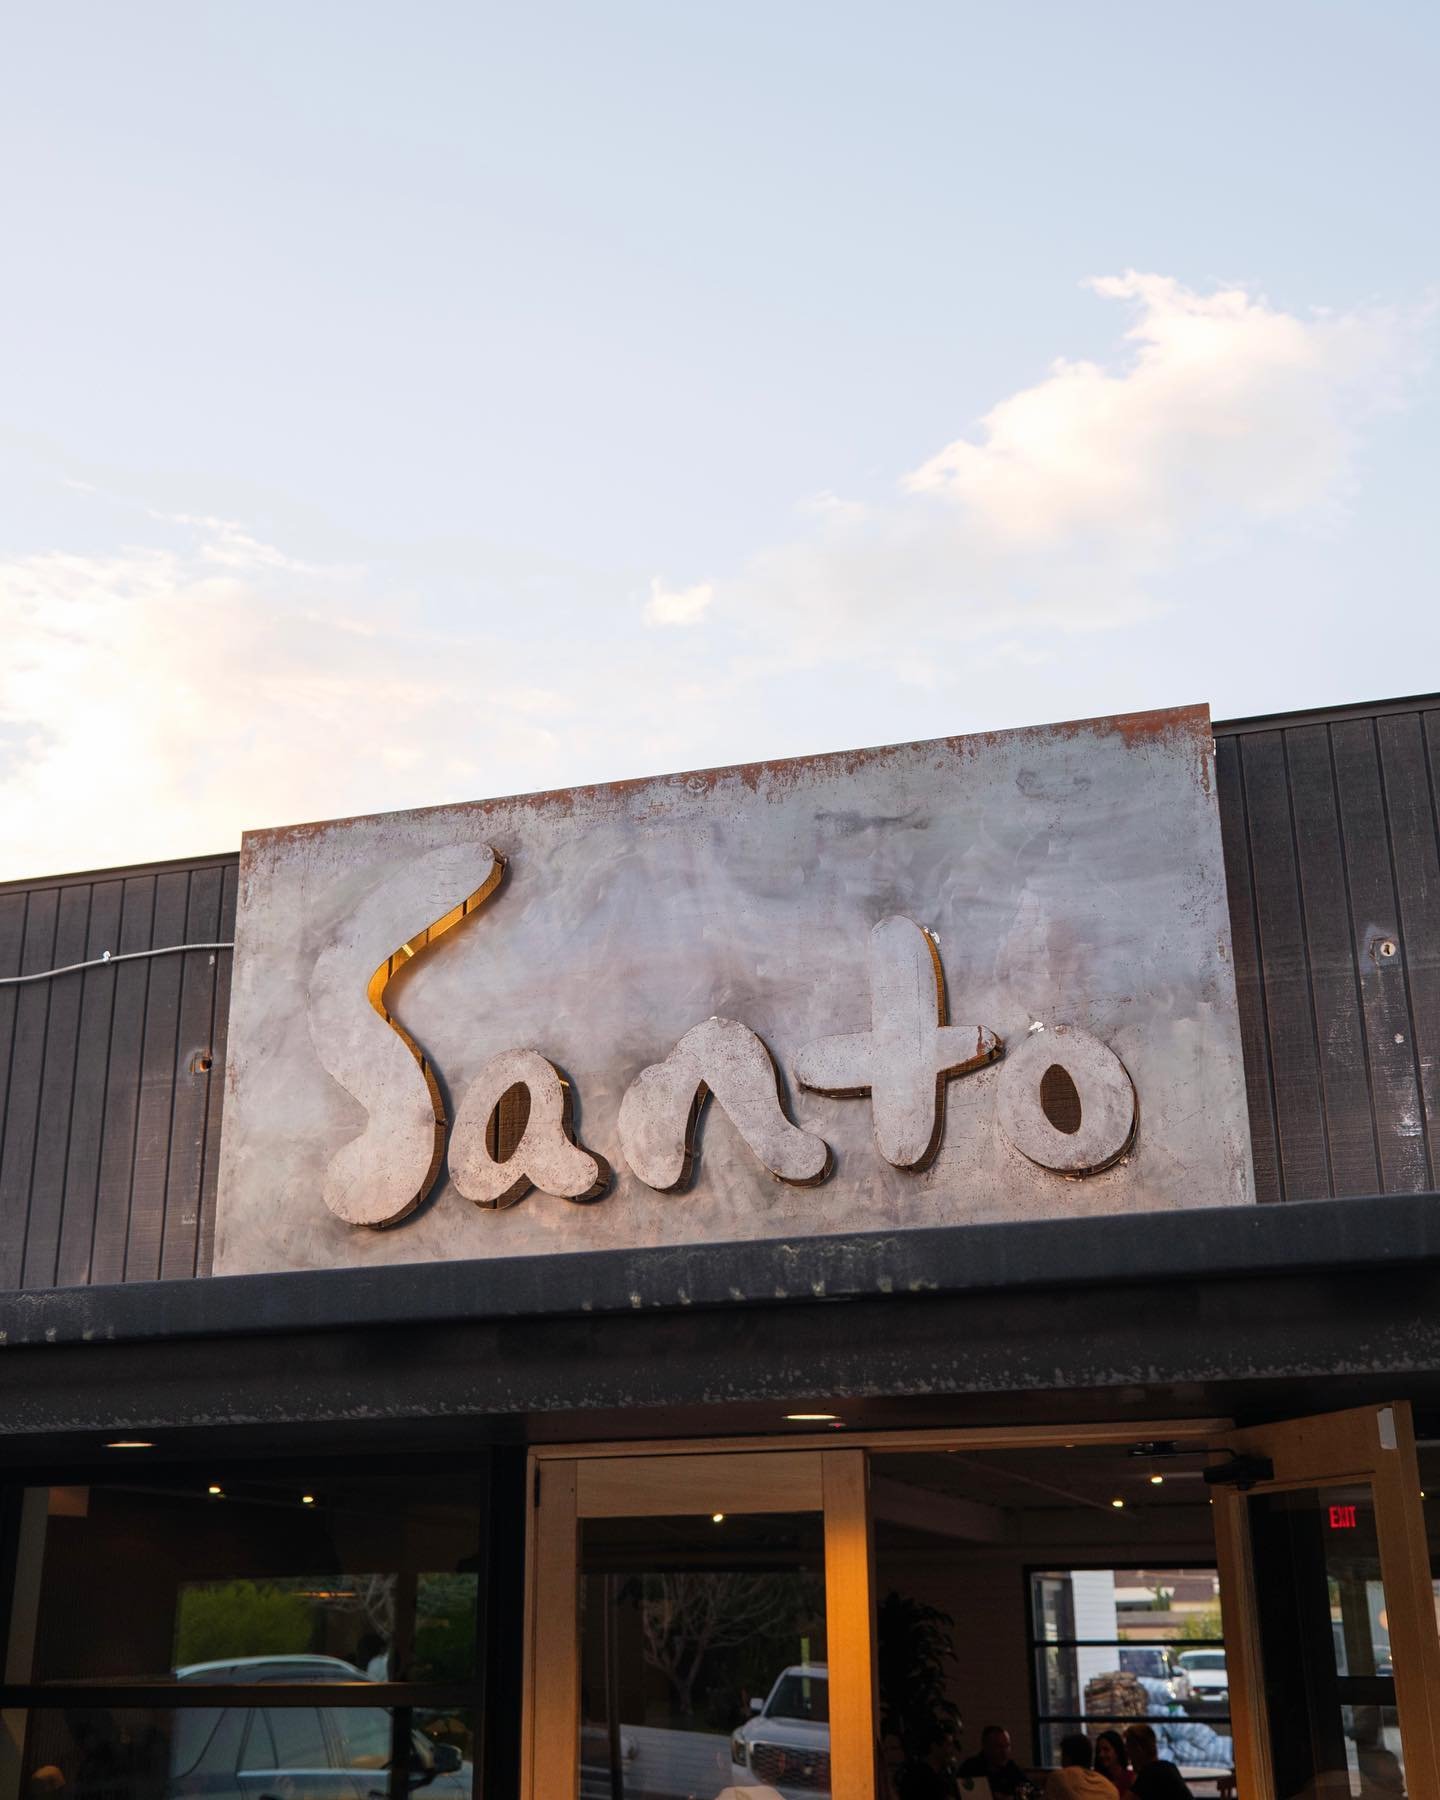 You can now find our ice cream at @santoarcadia! Santo is one of the best new restaurants in Phoenix, and we are honored to be a part of what they&rsquo;re doing! 

Two flavors are available on the dessert menu: Cucumber Elderflower Sorbet and Shake 